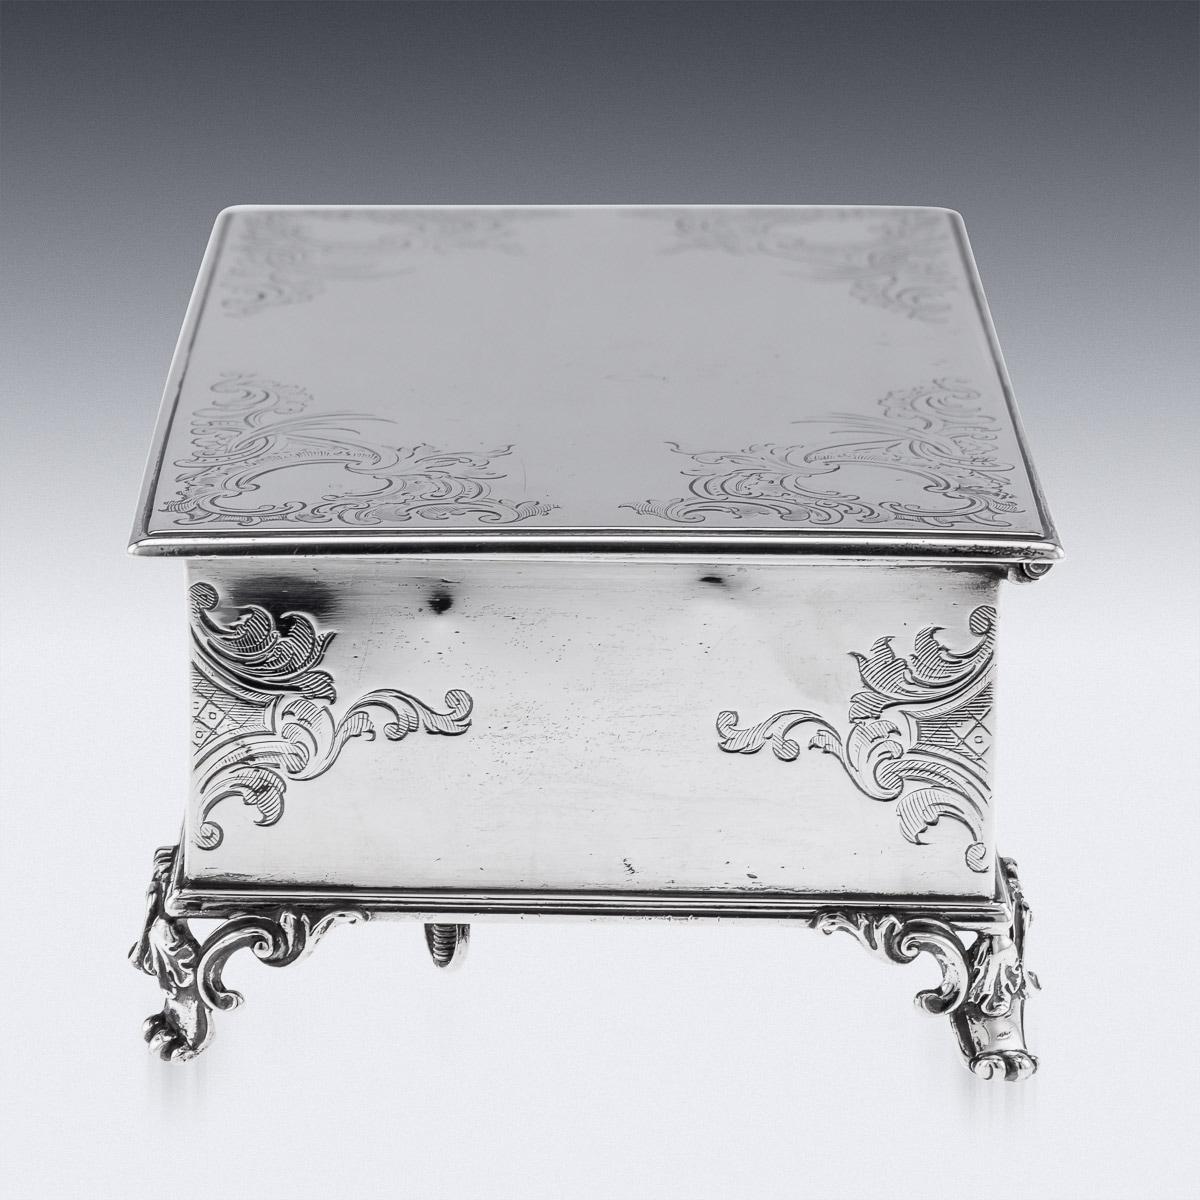 19th Century, Victorian Solid Silver Inkstand, Robert Hennell, c.1850 For Sale 1